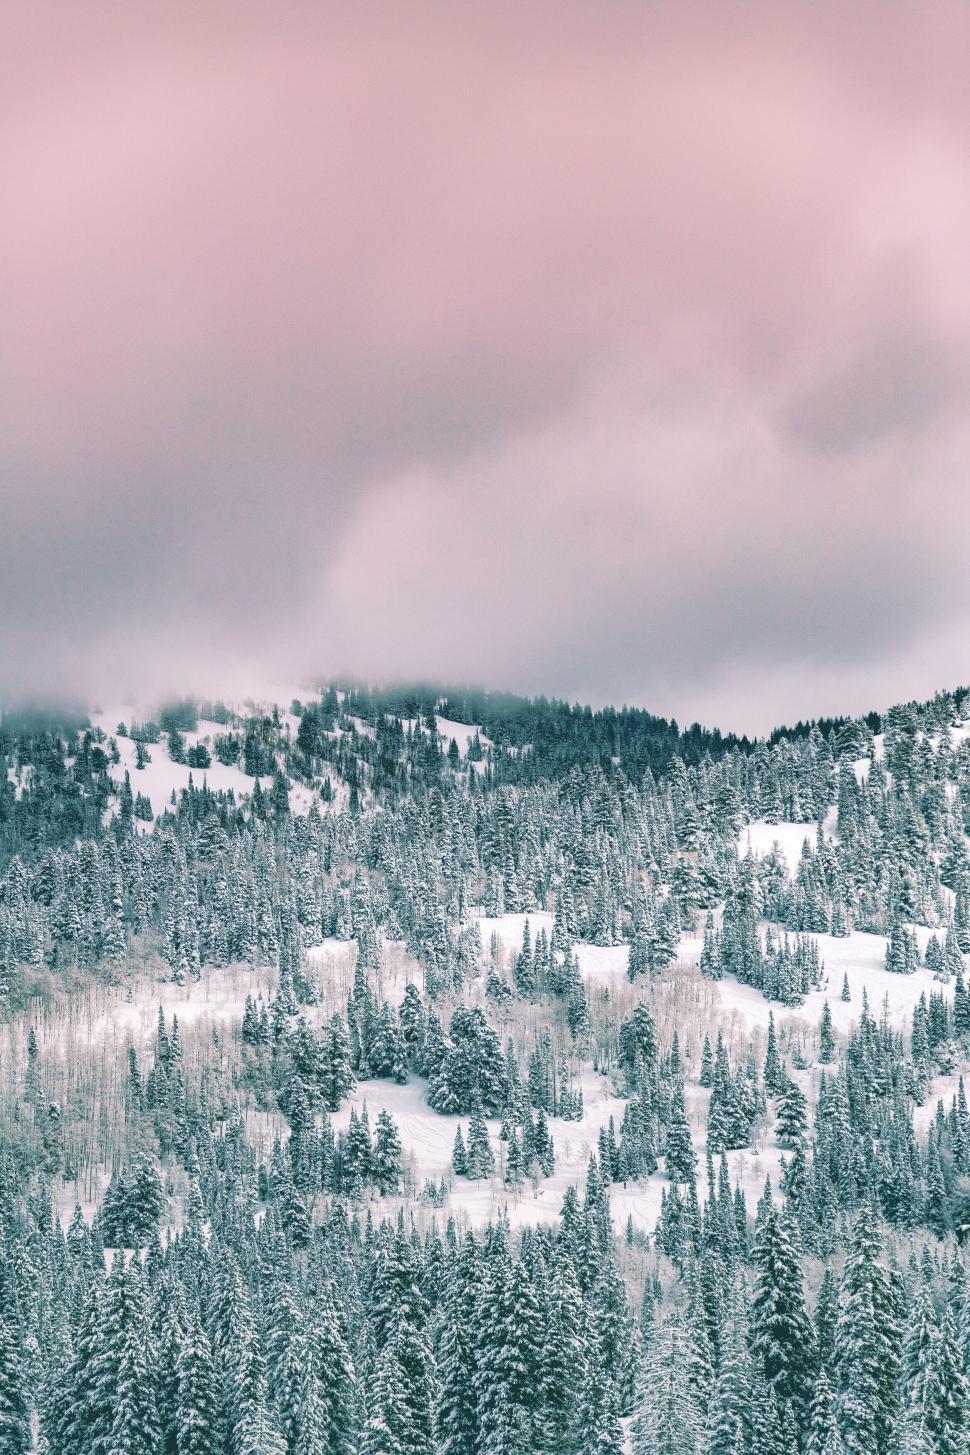 Free Image of Snow-covered trees on mountainous landscape 